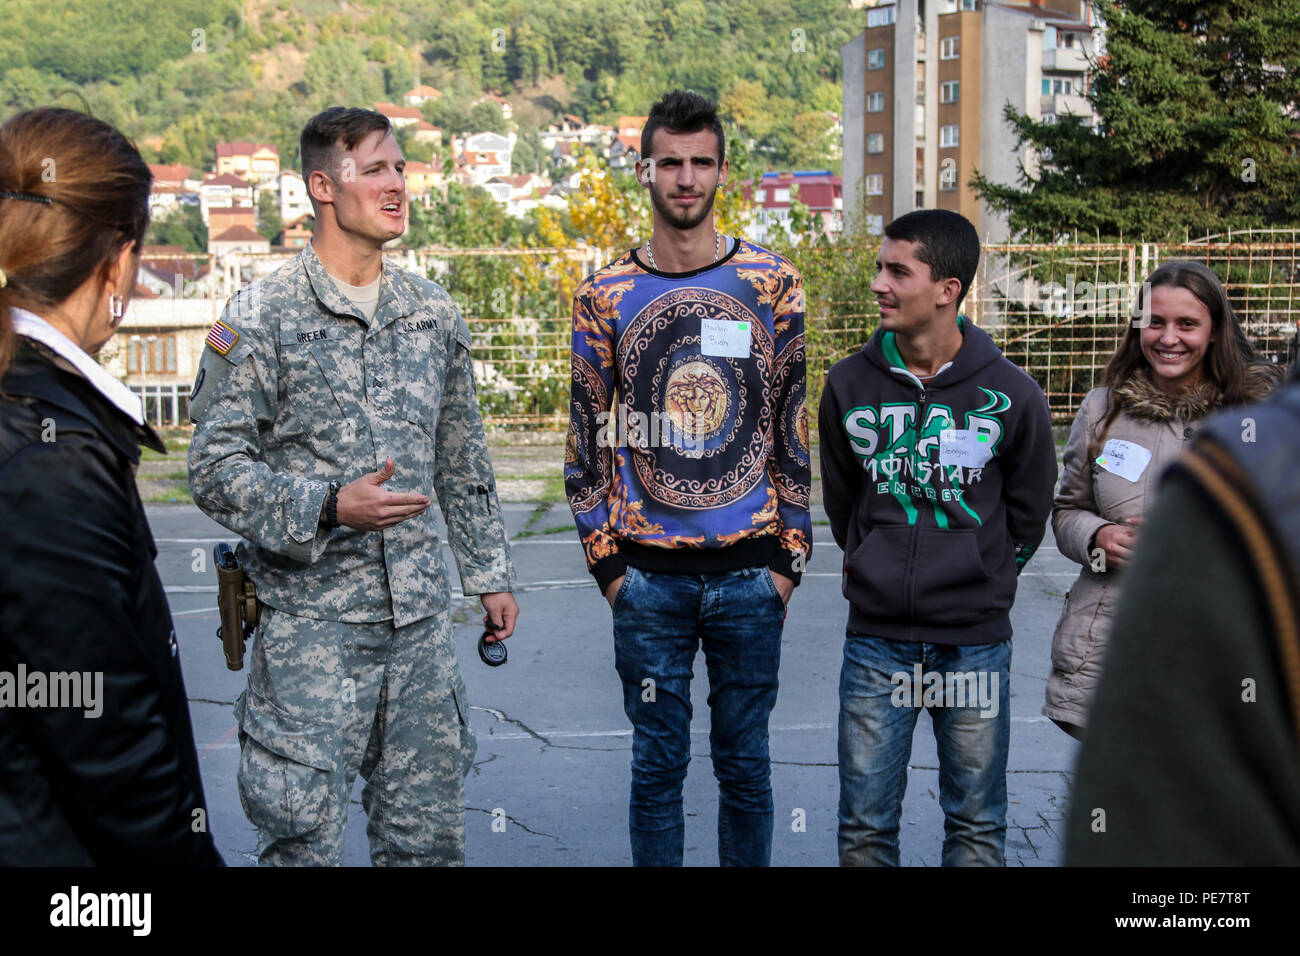 U.S. Army Sgt. Mark Green, a North Carolina National Guard Soldier deployed to Kosovo with A Company, 1st Combined Arms Battalion, 252nd Armor Regiment, leads a discussion on overcoming stereotypes while volunteering at a Violence Free Future youth tolerance event, Oct. 17, 2015, in Kacanik, Kosovo. More than 100 students attended the Pristina Rotary Club-sponsored event, where they participated in discussions and activities geared toward promoting pre-social behaviors around Kosovo’s youth. (U.S. Army photo by Staff Sgt. Mary Junell, Multinational Battle Group-East) Stock Photo